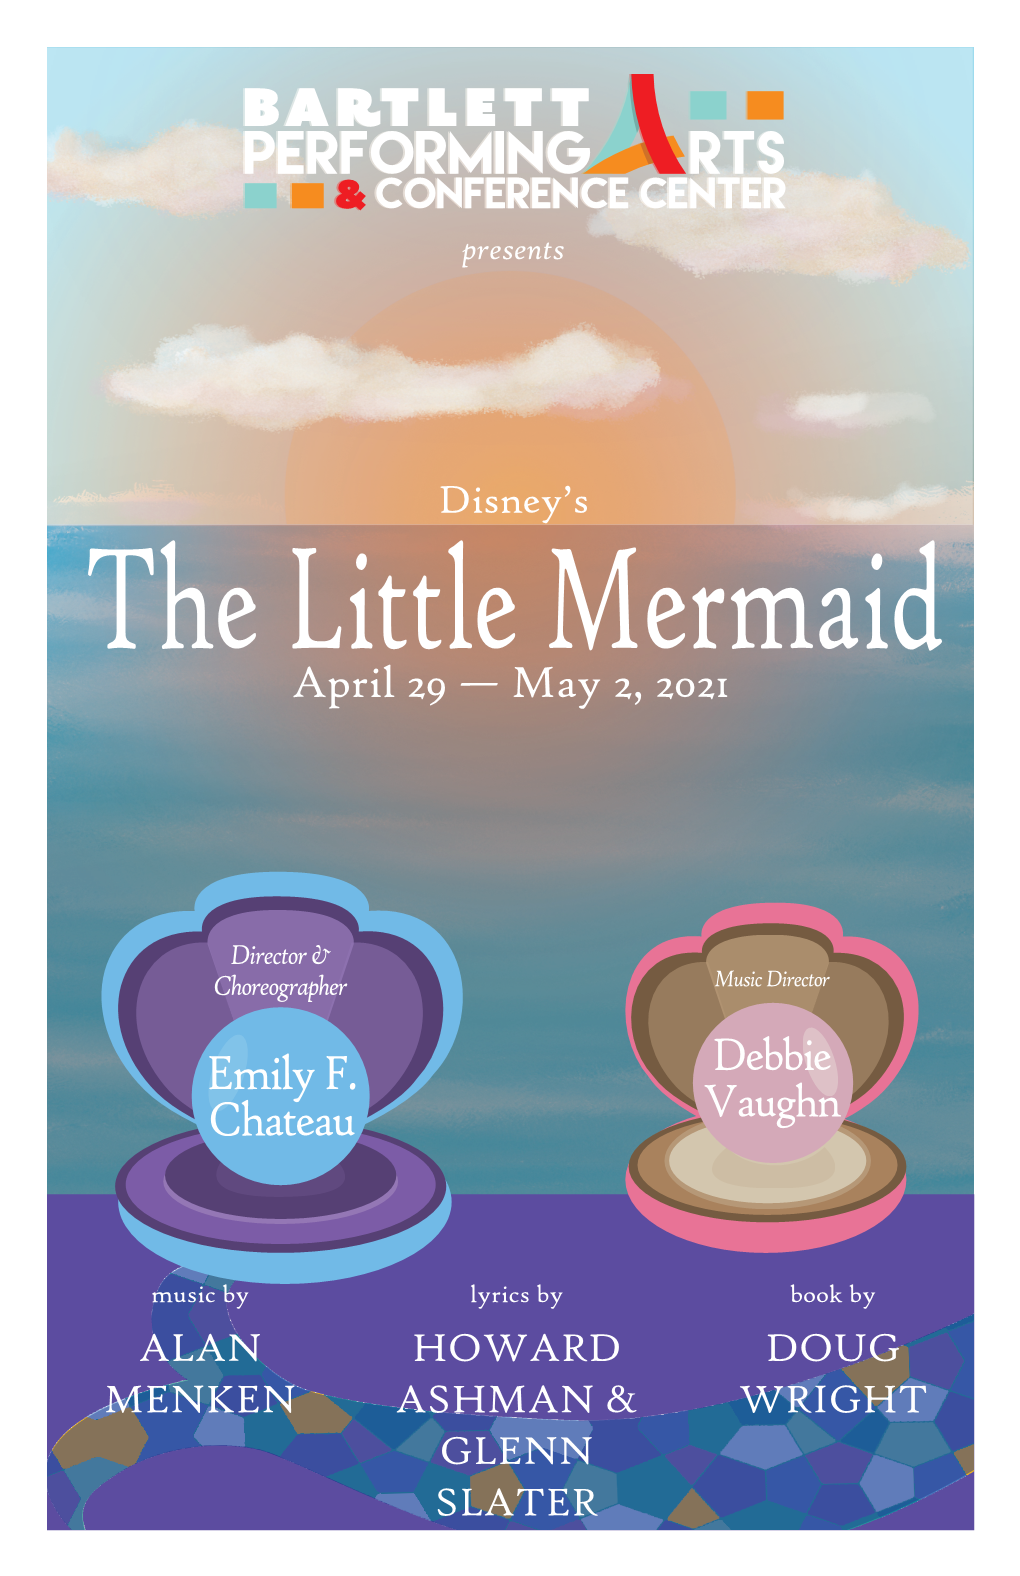 The Little Mermaid April 29 — May 2, 2021